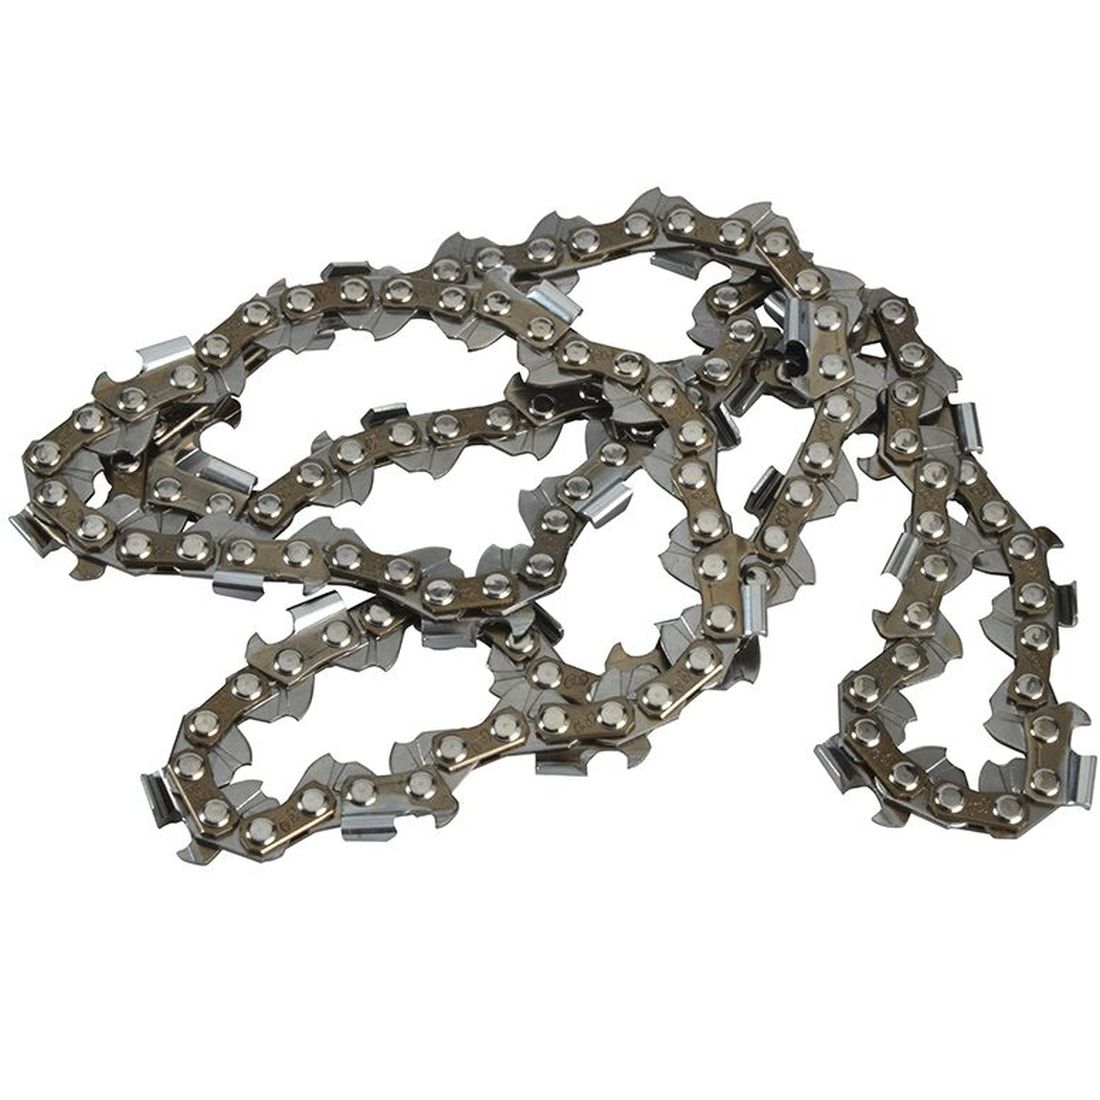 ALM CH055 Chainsaw Chain 3/8in x 55 links 1.3mm - Fits 40cm Bars                    